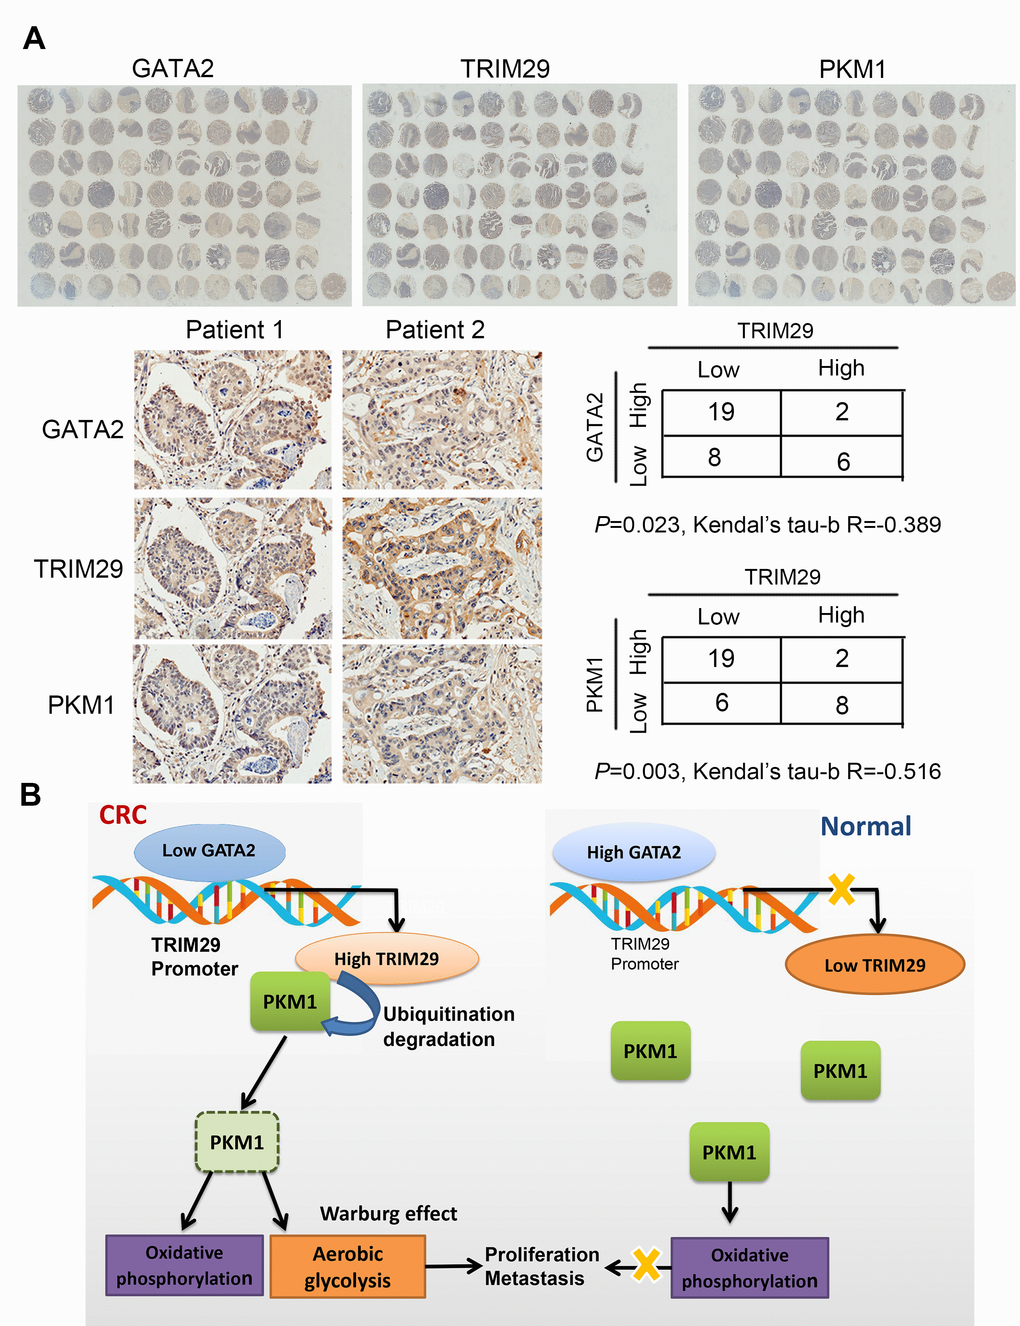 TRIM29 protein negatively correlates with GATA2 protein and PKM1 protein in CRC. (A) IHC results of TRIM29, GATA2 and PKM1 in the tissue array. (B) Model of the GATA2-TRIM29-PKM1 axis in CRC. The statistical analysis was performed using the Kendual’s tau-b test. *P P 